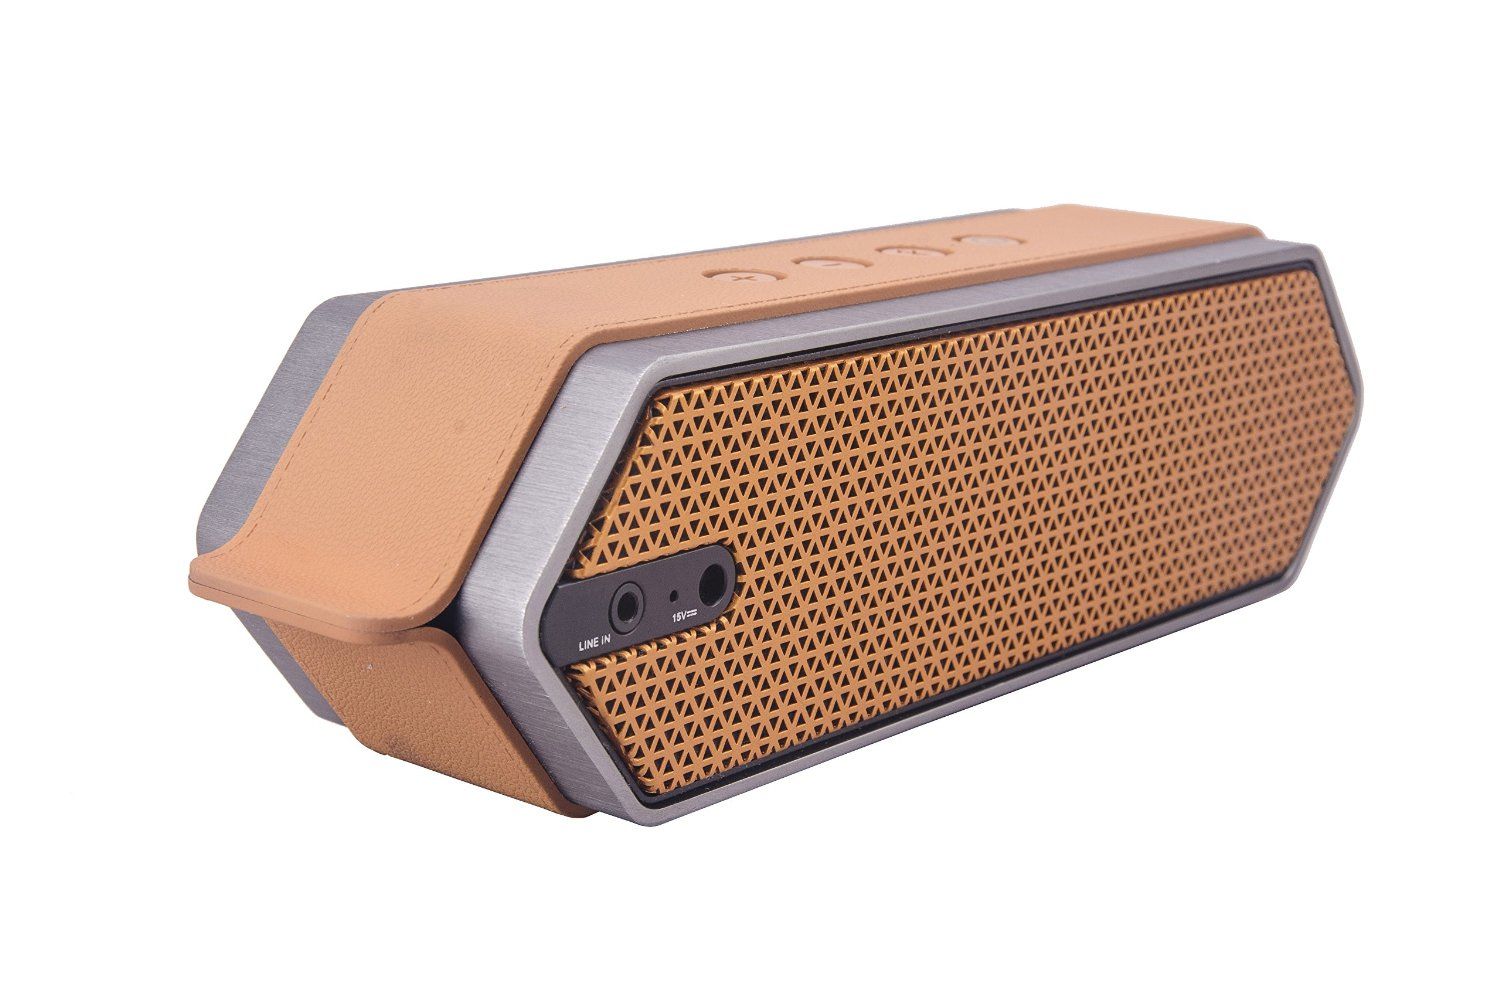 Father's Day audio gifts: Dreamwave Harmony is one of the most handsome Bluetooth speakers we've seen with superb sound